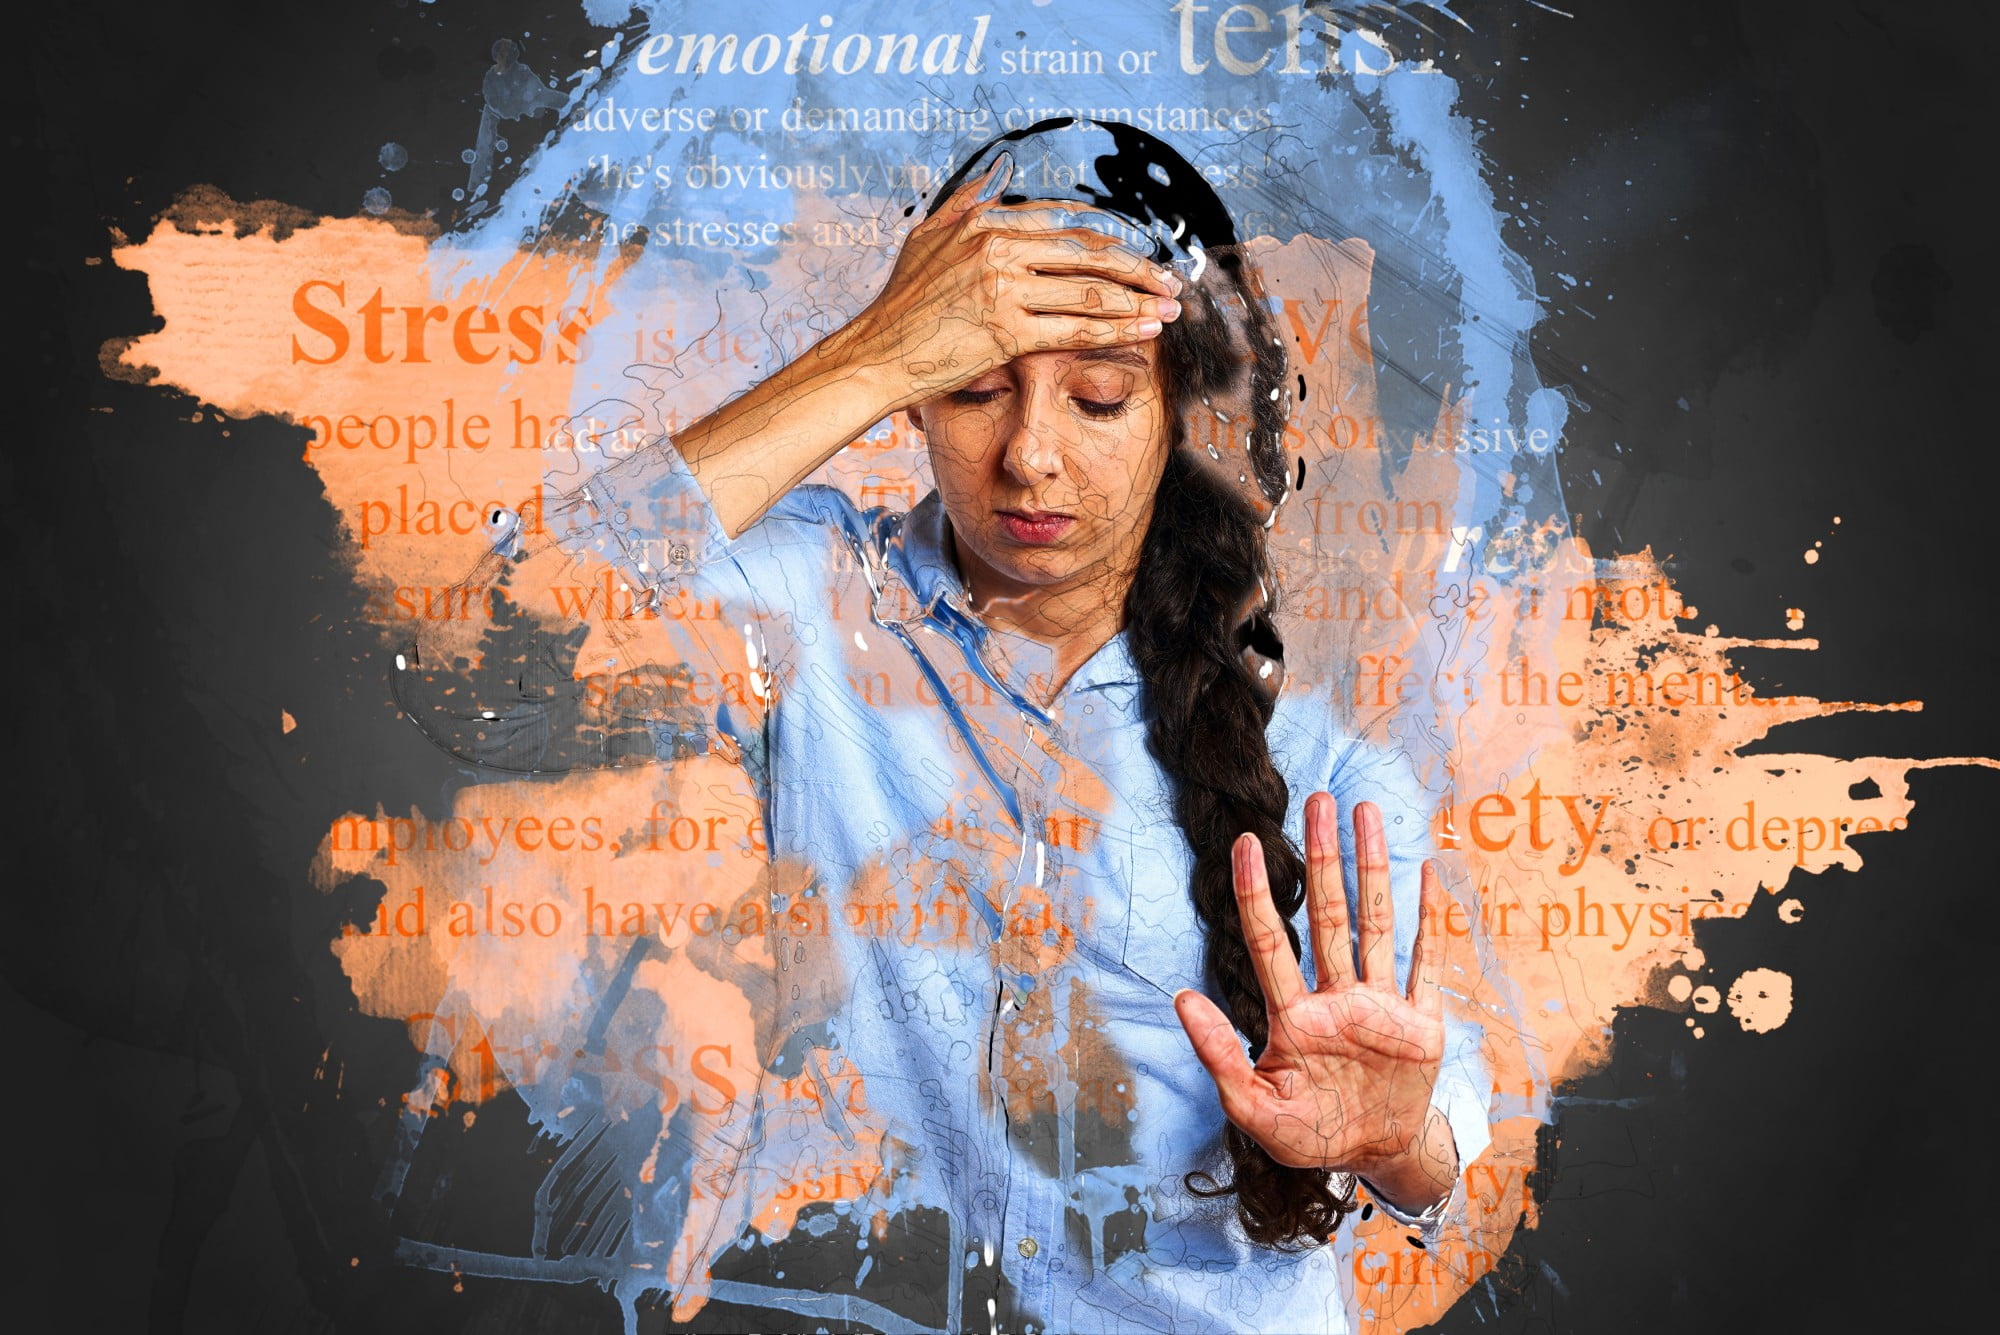 Anxiety vs stress: How much do you know about the differences between the two? Read on to learn more about the differences between them.